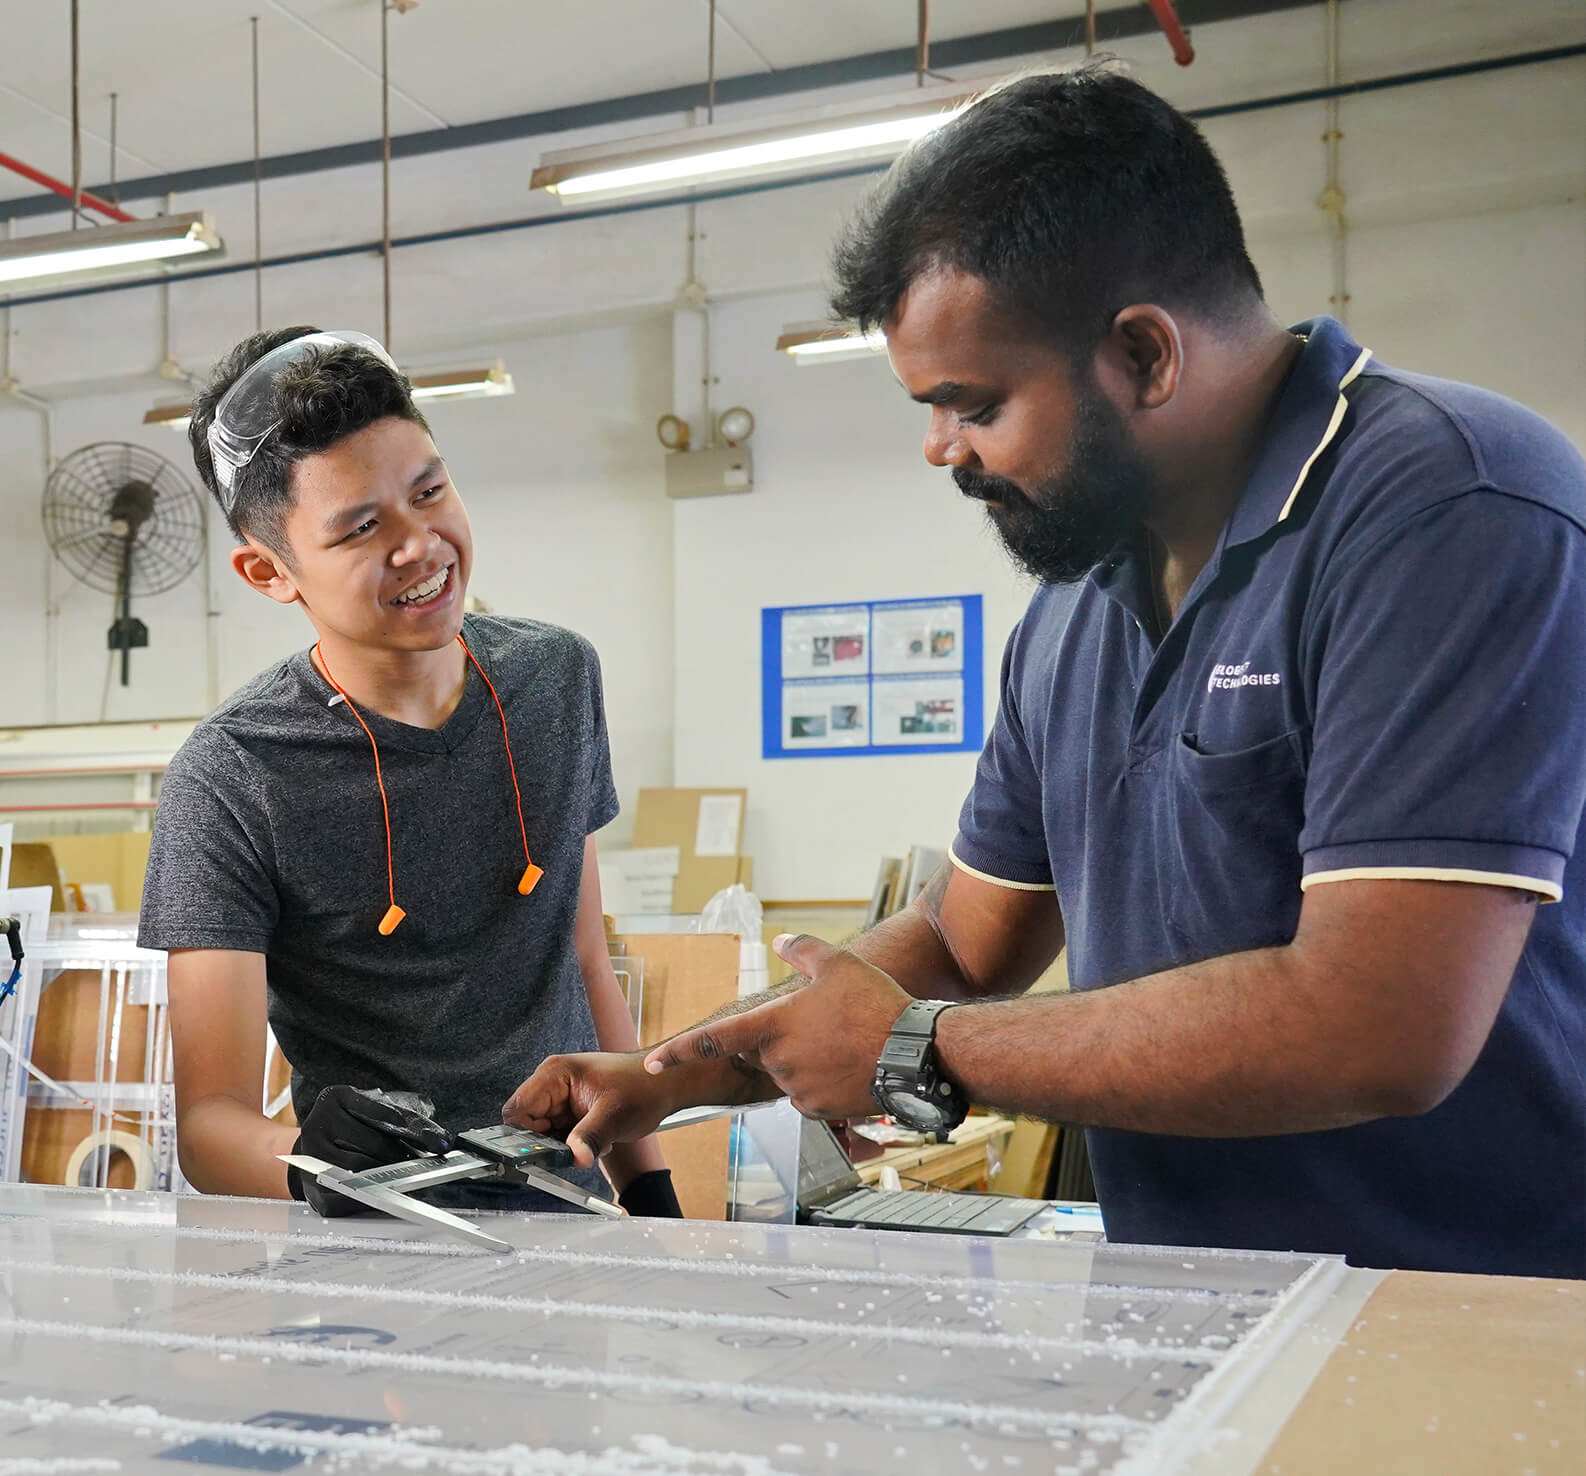 An ITE student interning at a manufacturing company